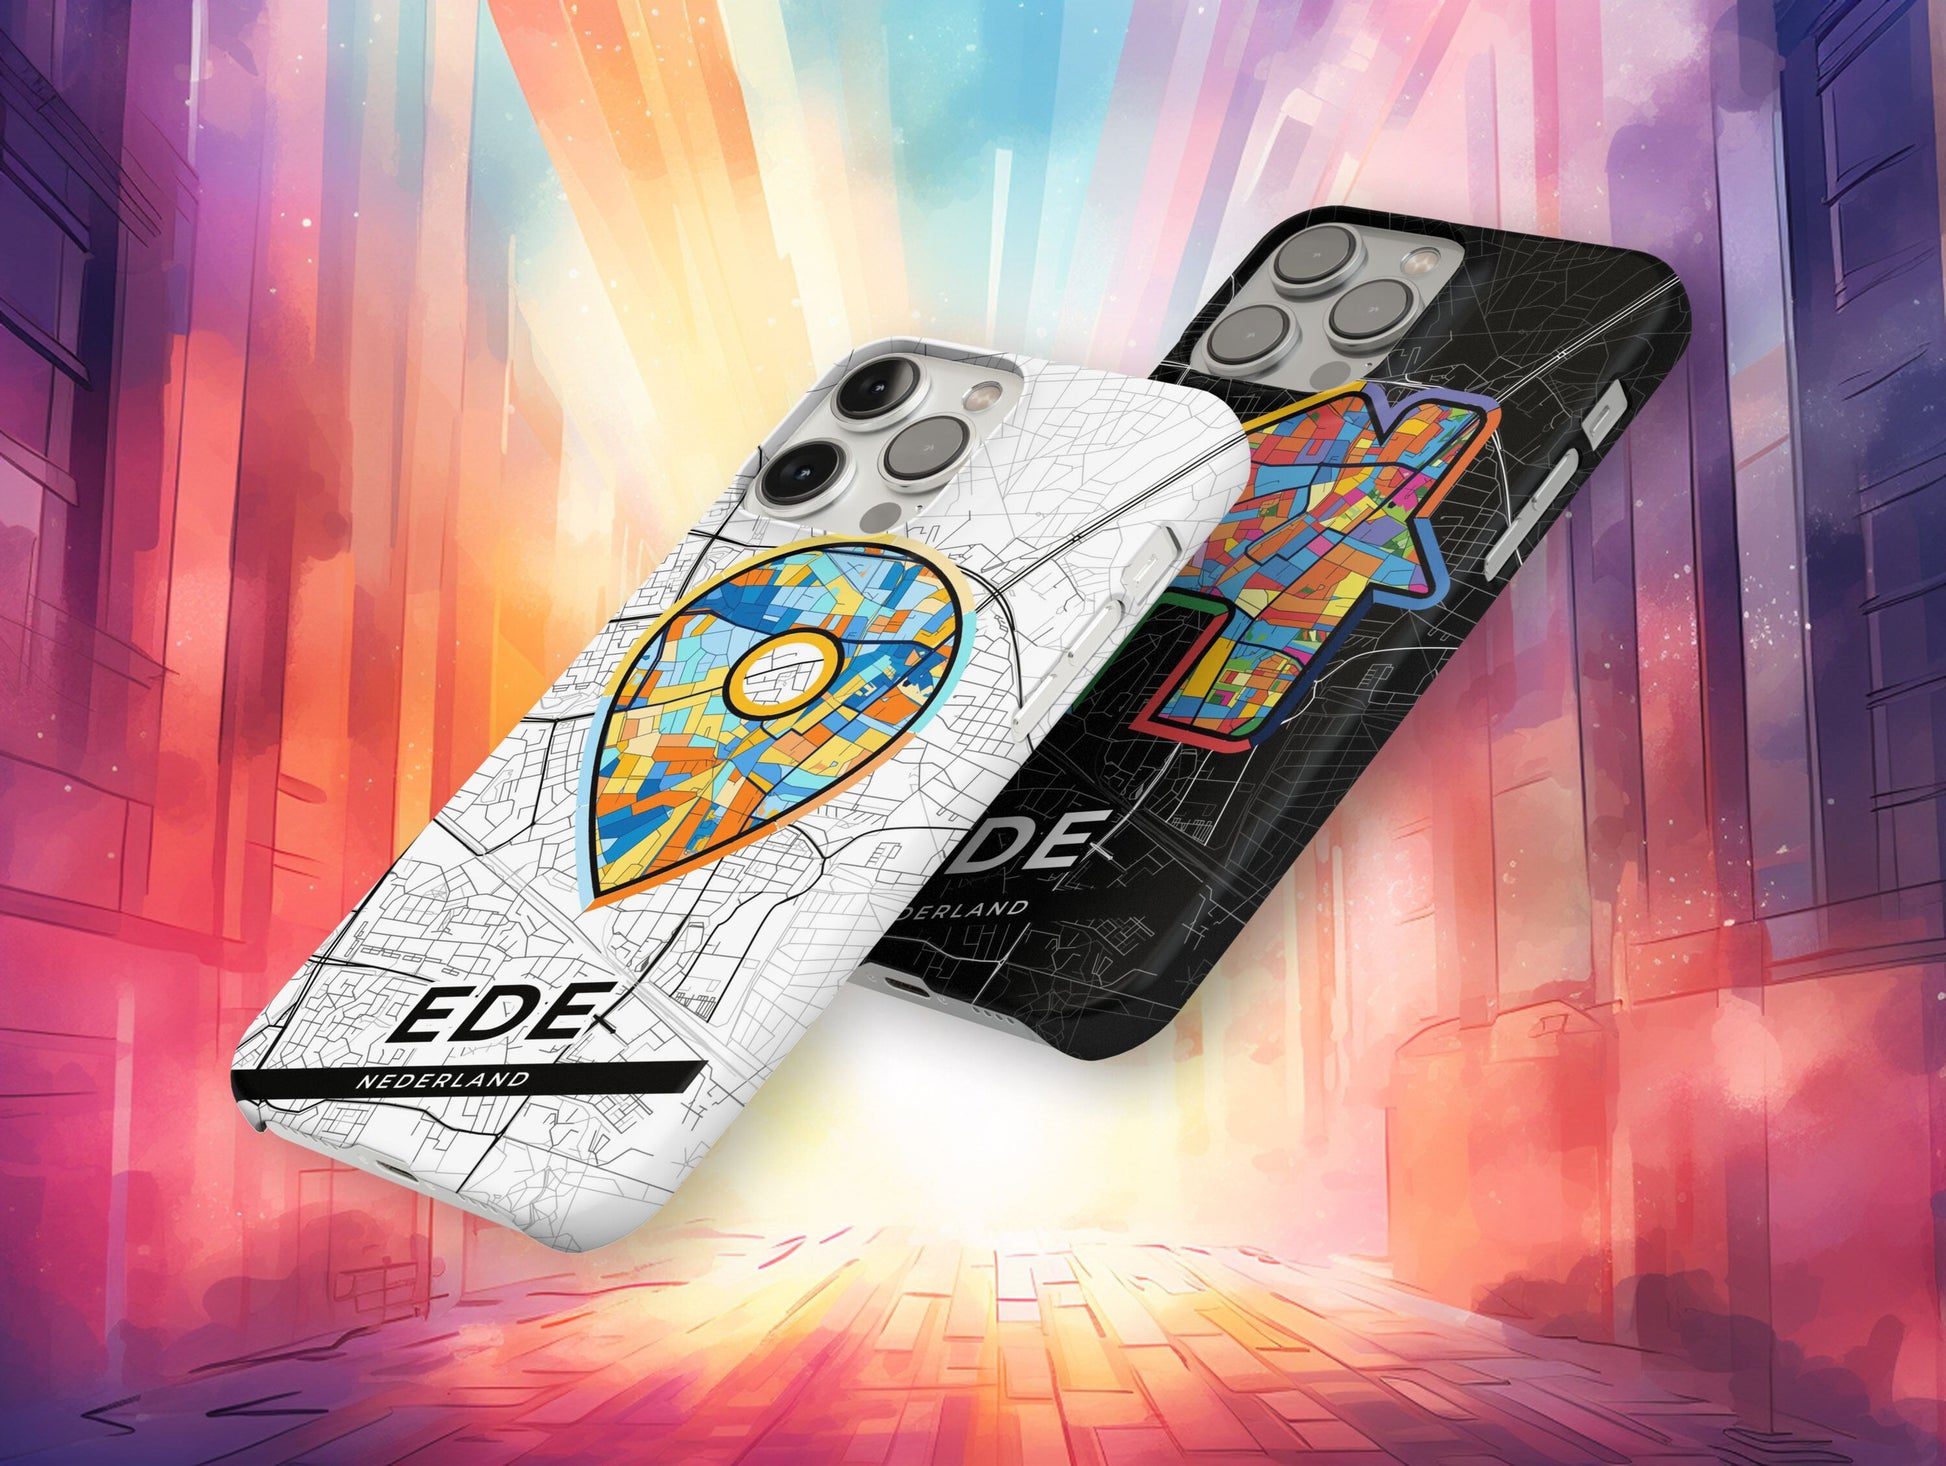 Ede Netherlands slim phone case with colorful icon. Birthday, wedding or housewarming gift. Couple match cases.